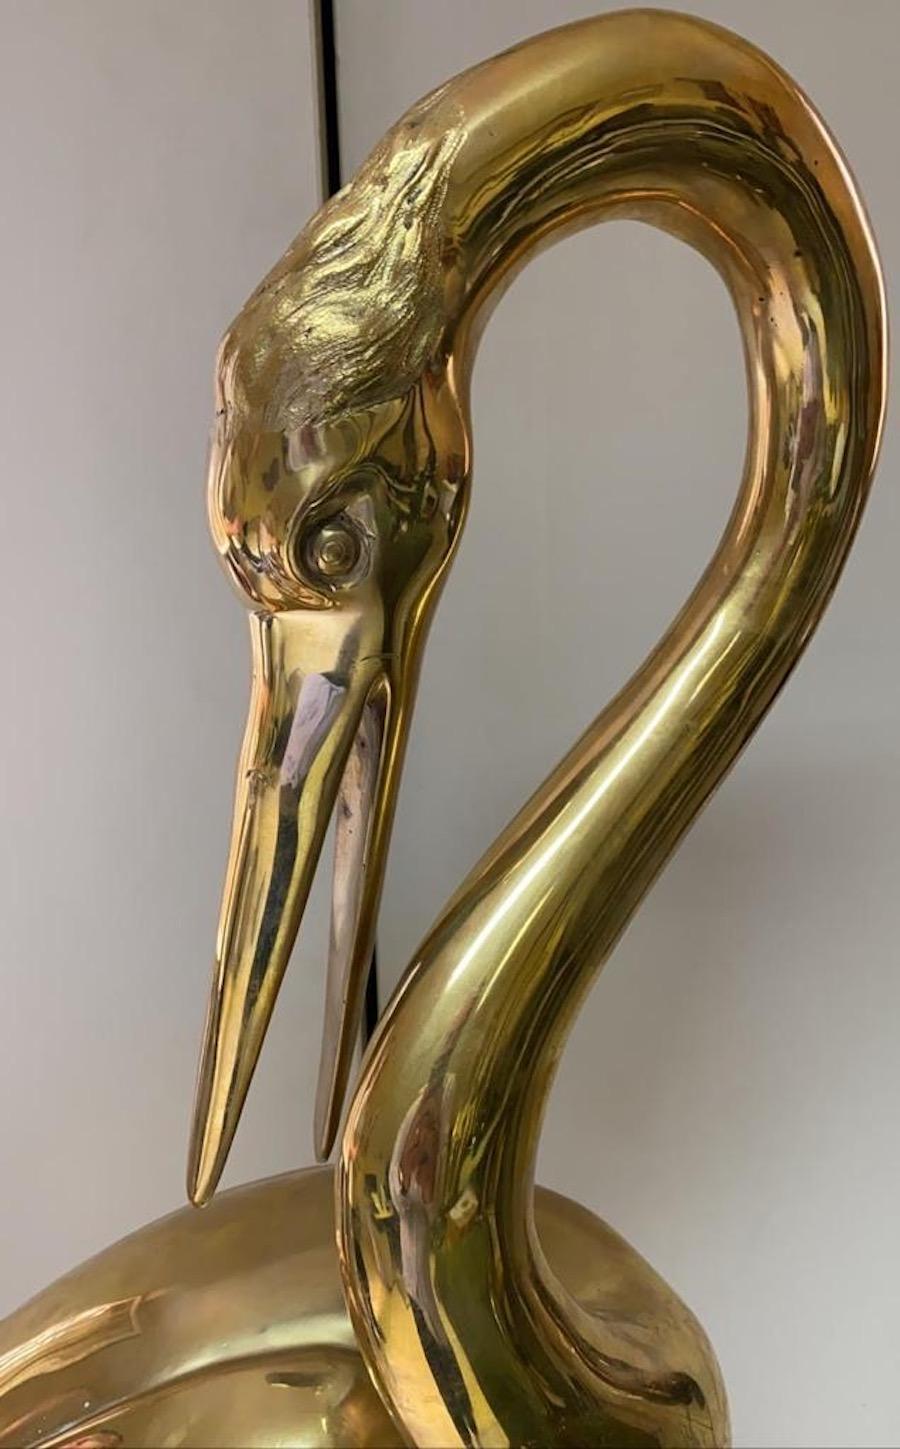 Elegant pair of gilt bronze heron sculptures. The item will be well-suited to either an indoor or outdoor setting.